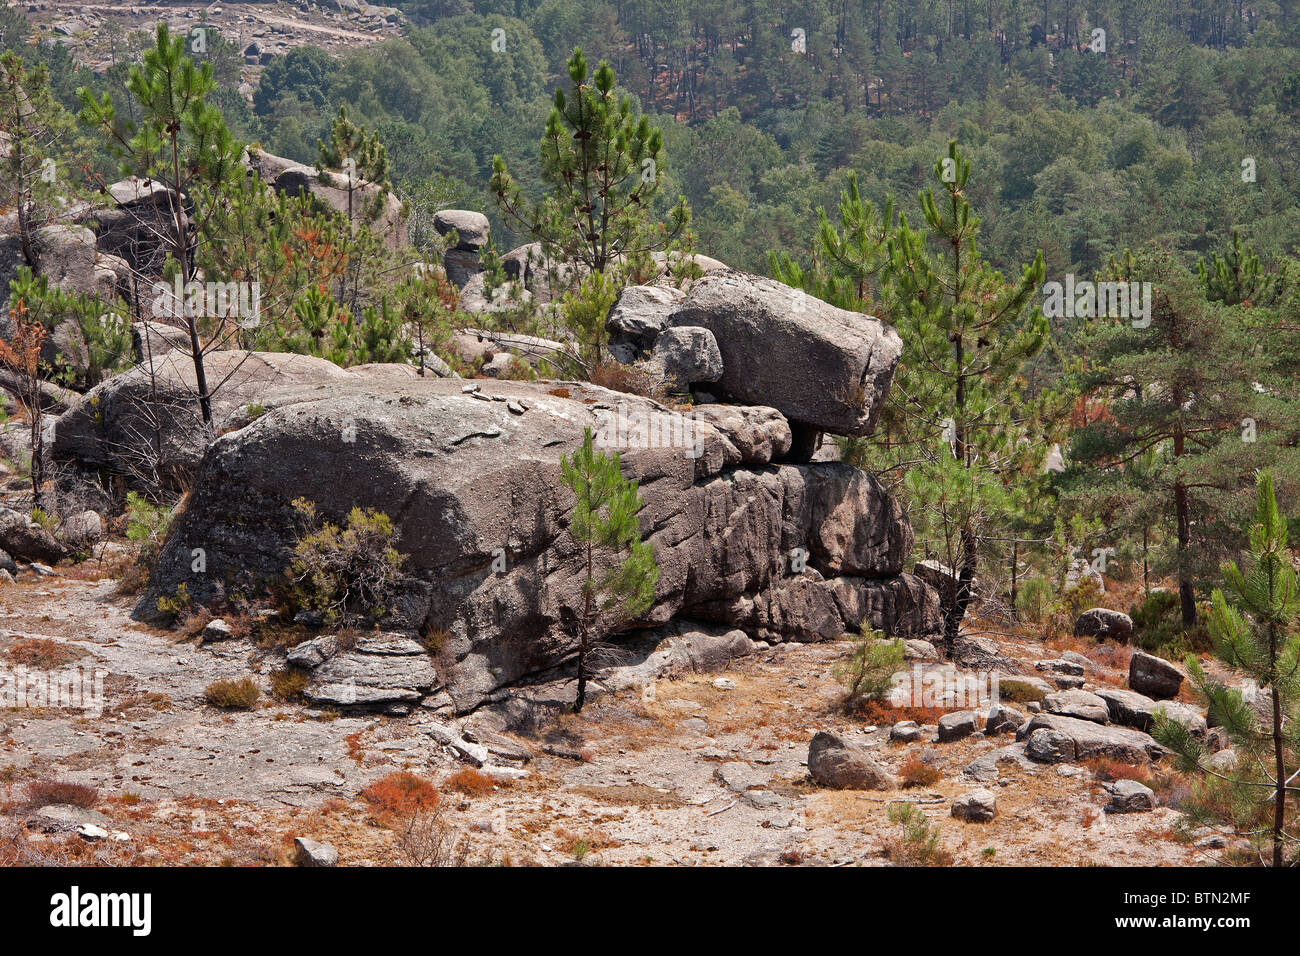 Rocks on Serra do Gerês in Portugal that looks like the Aibo Dog product from Sony. Stock Photo